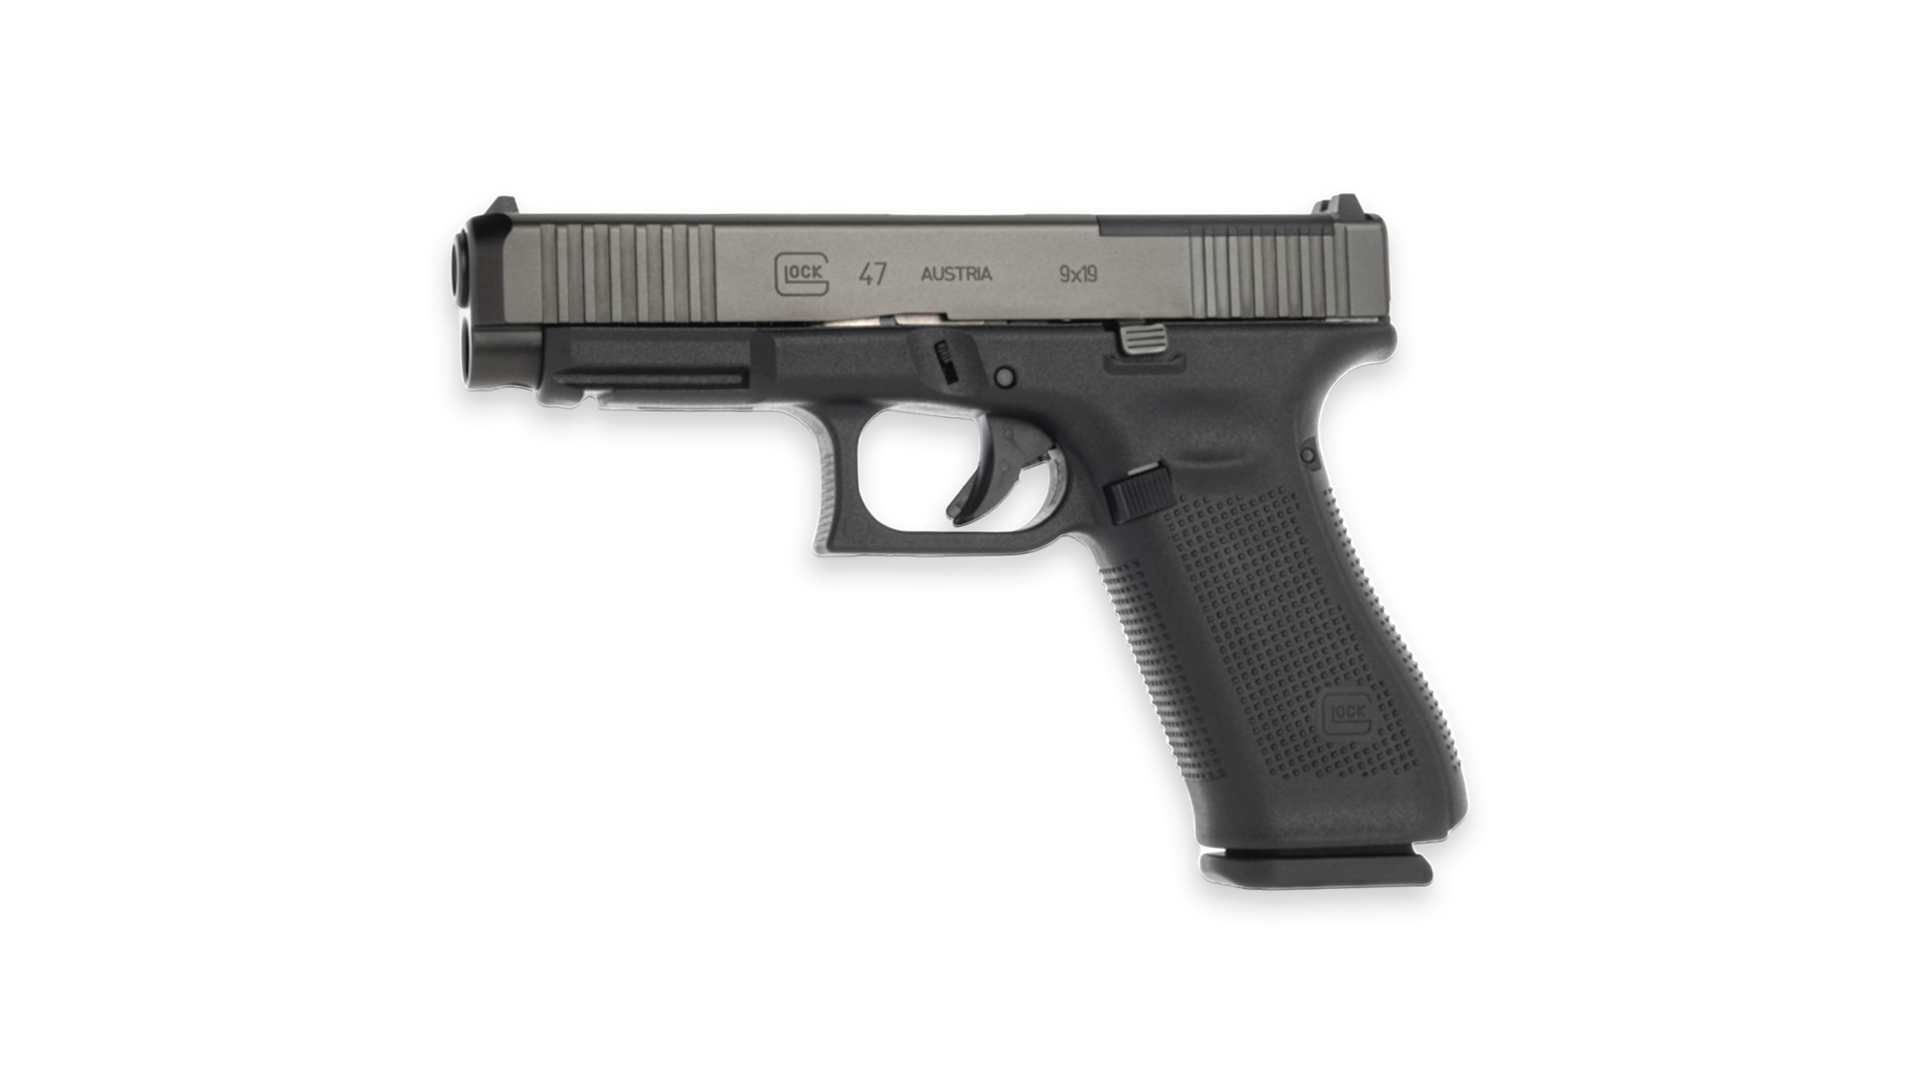 The Glock 47 MOS is a 9mm pistol that combines the best features of the Glock 17 Gen 5 MOS, Glock 19 Gen 5 MOS,